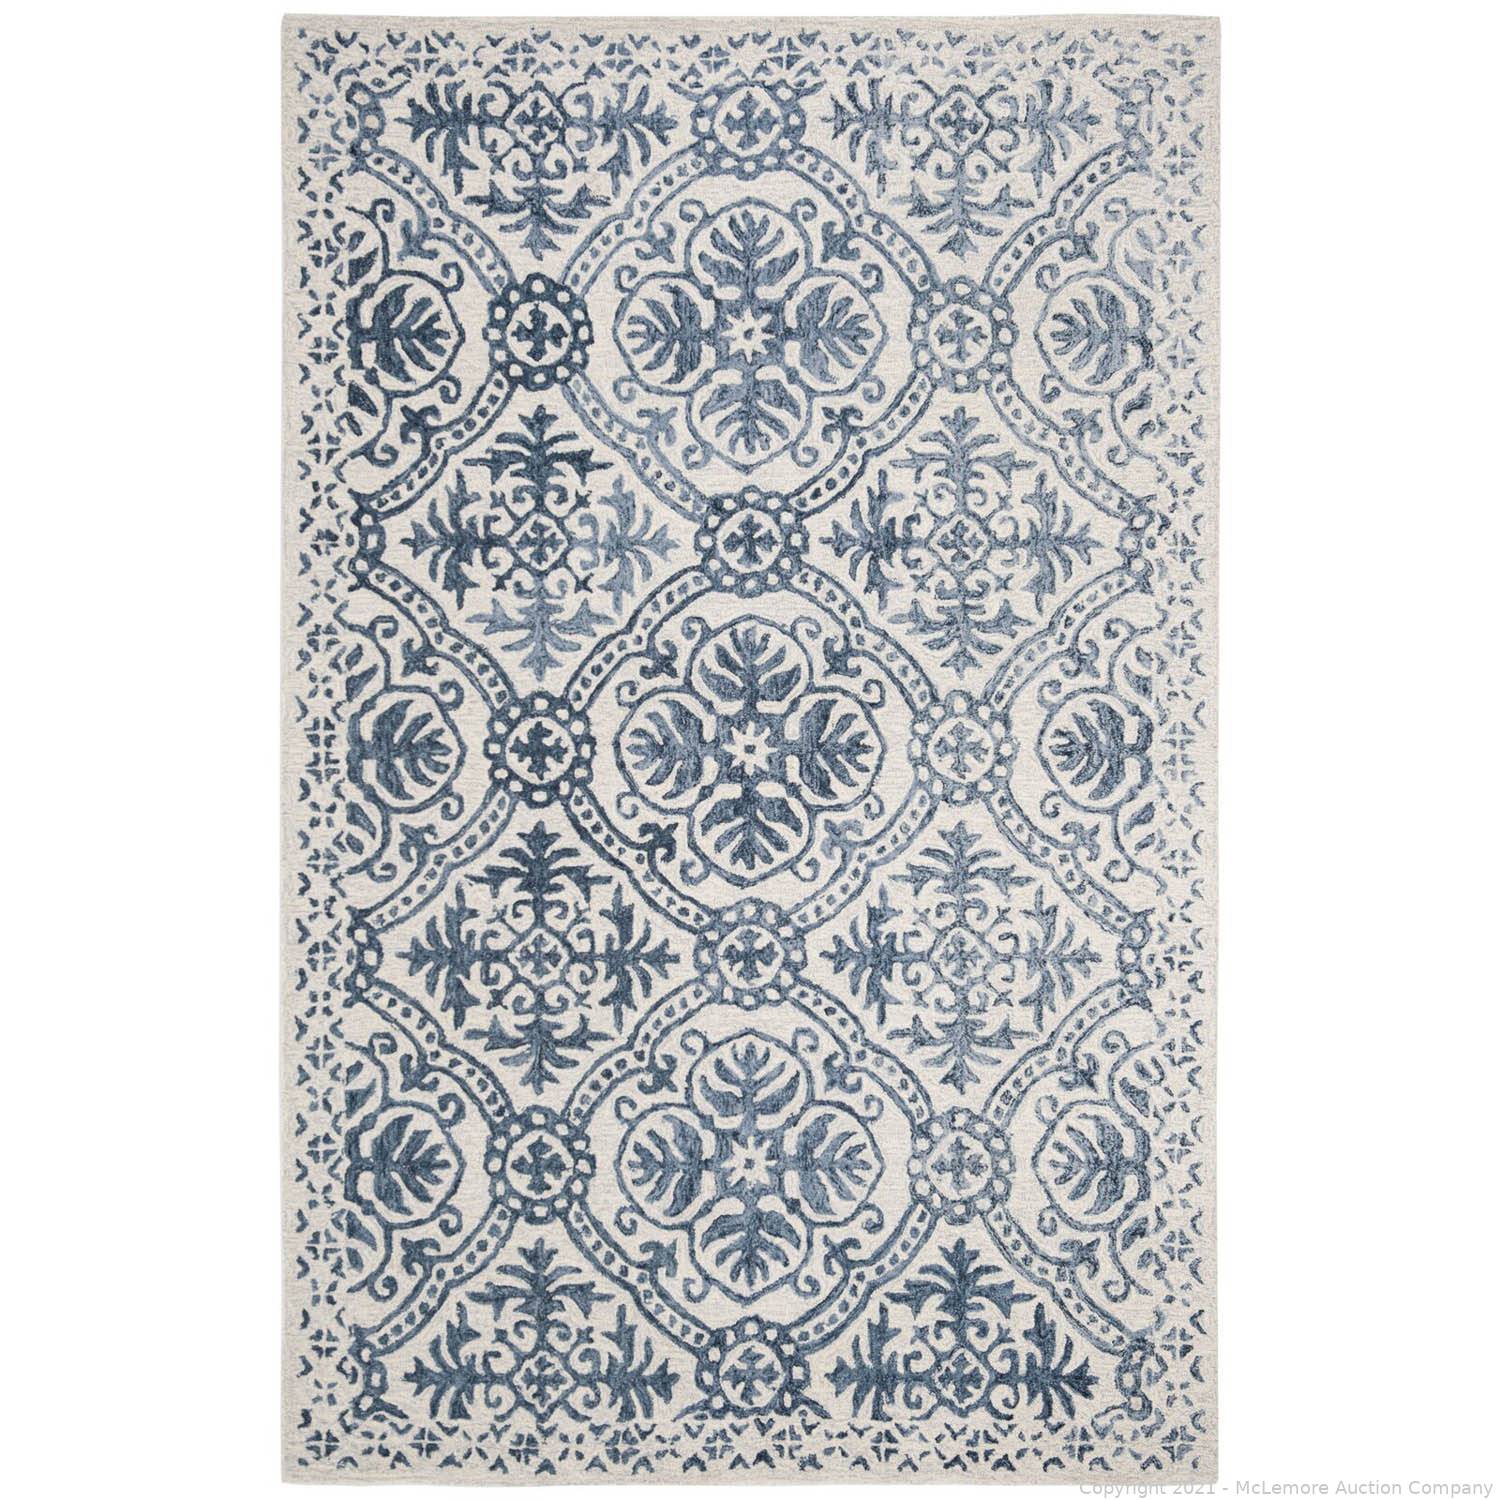 McLemore Auction Company - Auction: Brand New, High End Rugs and Runners in  a Variety of Designs and Sizes from  ITEM: Nina Oriental  Handmade Tufted Wool Navy Area Rug - by